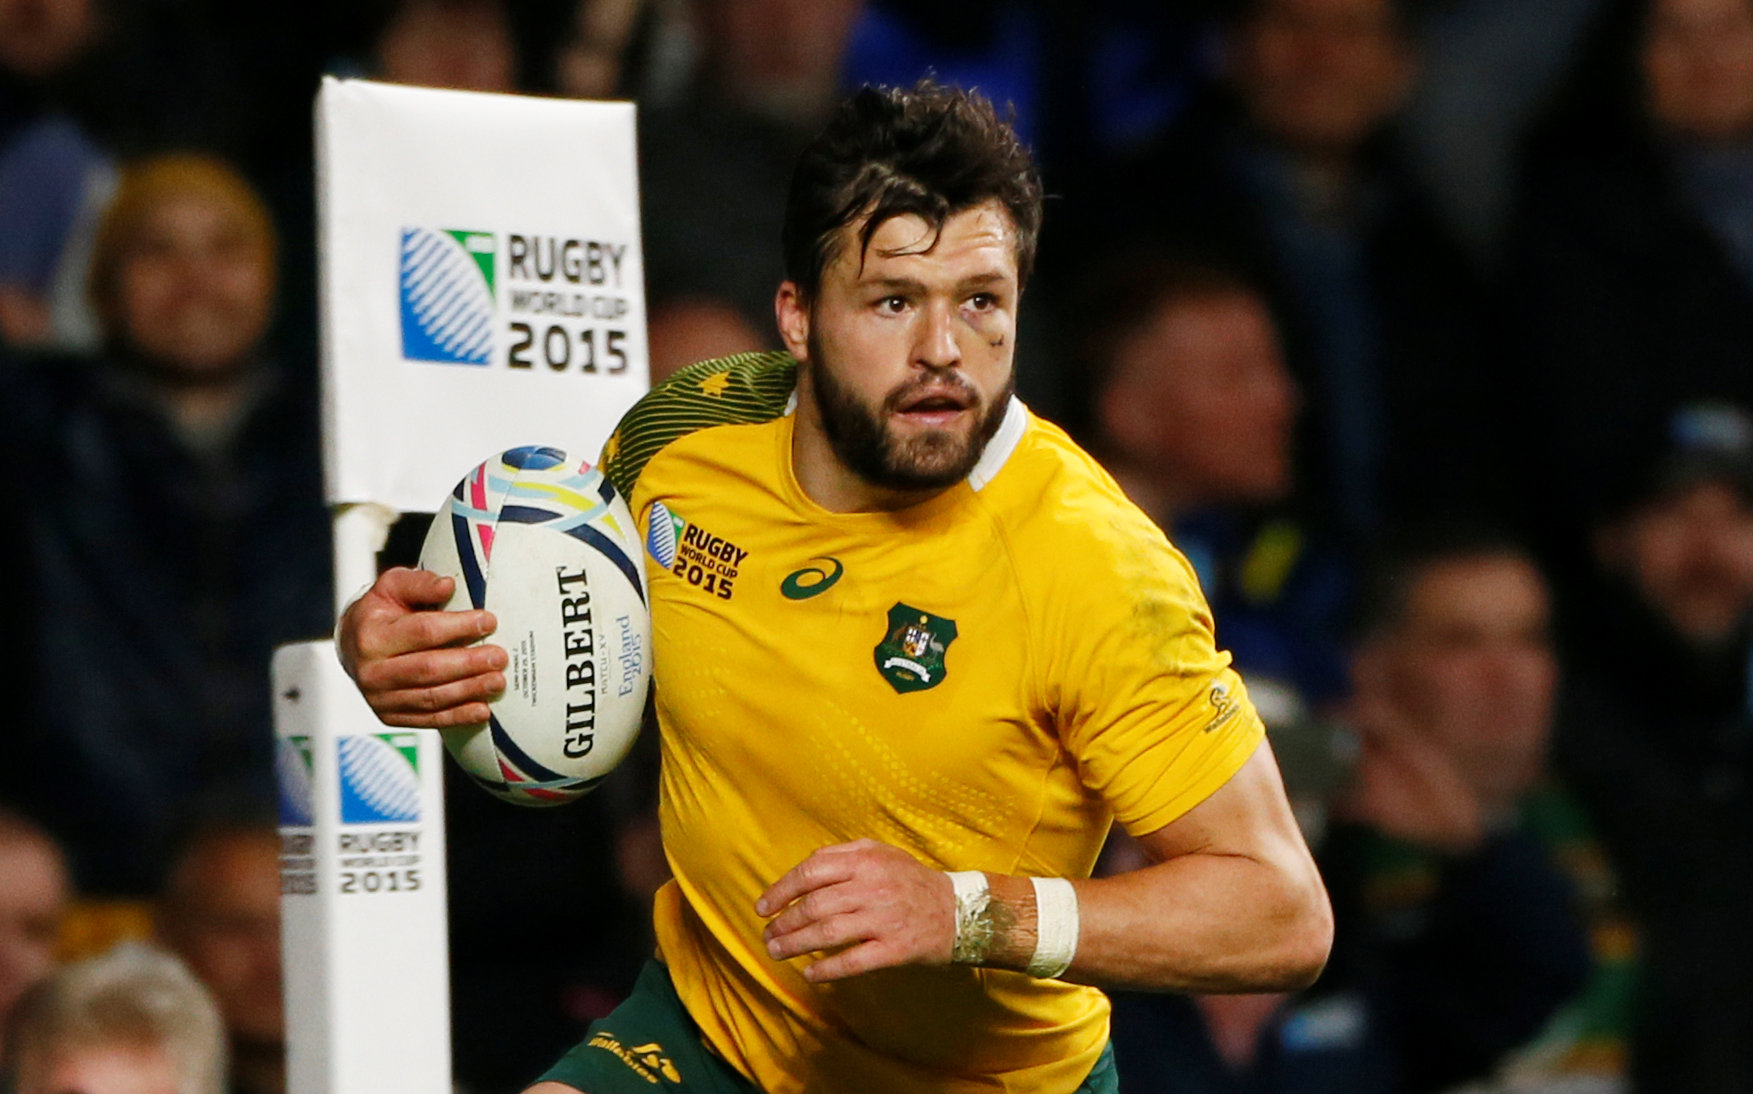 Rugby: Recalled Ashley-Cooper sets sight on fourth World Cup